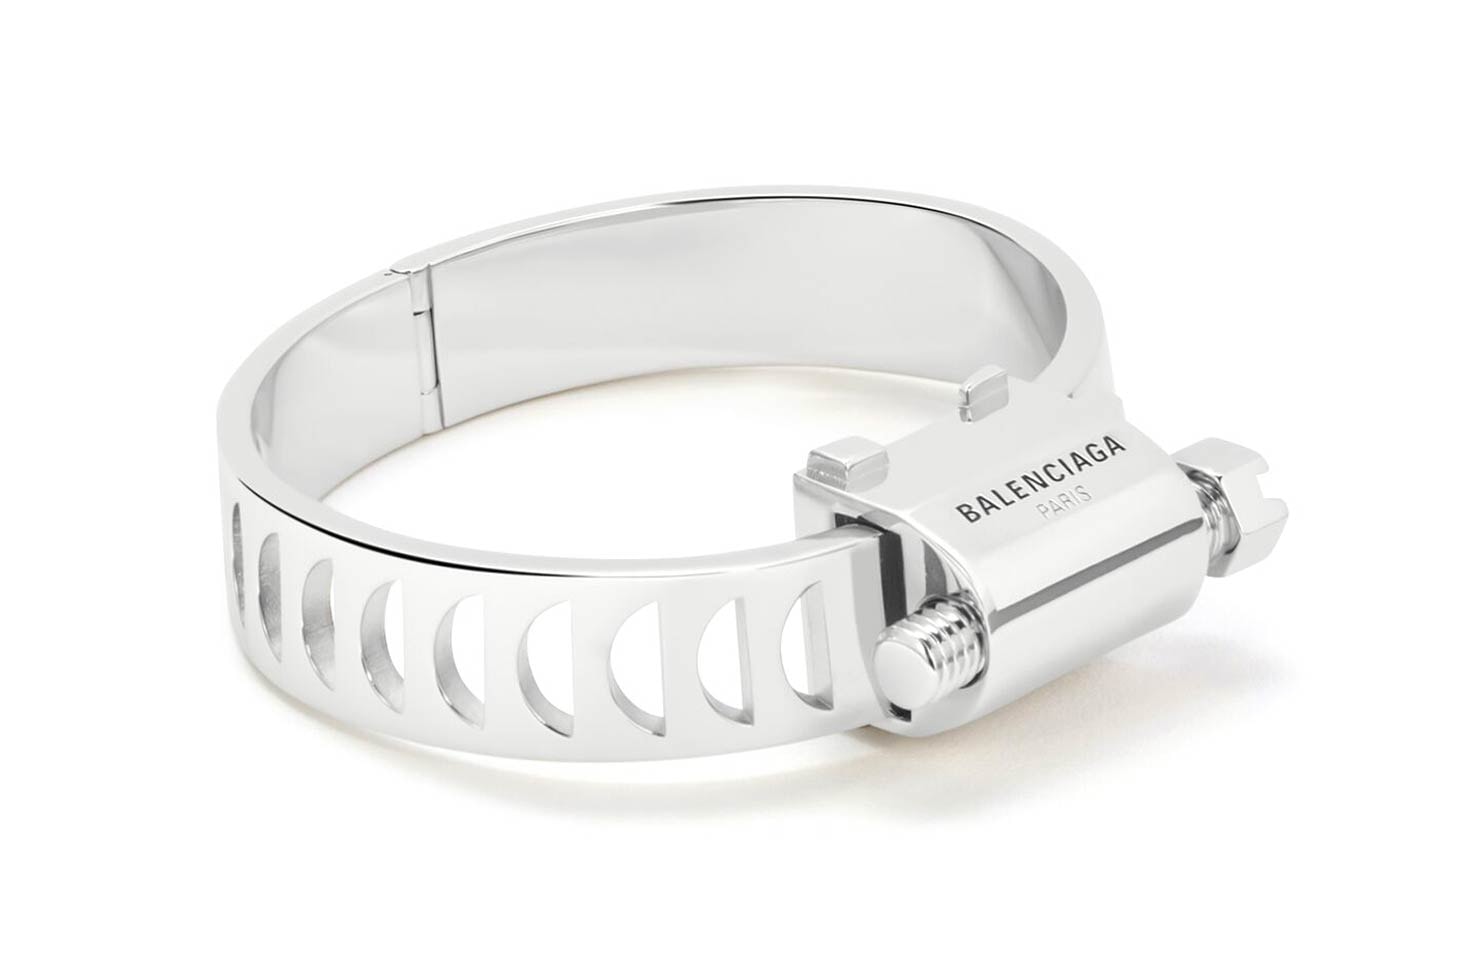 Balenciaga silver Tool Bracelet hose clamp Release industrial accessories jewelry France Italy design fashion silver 925